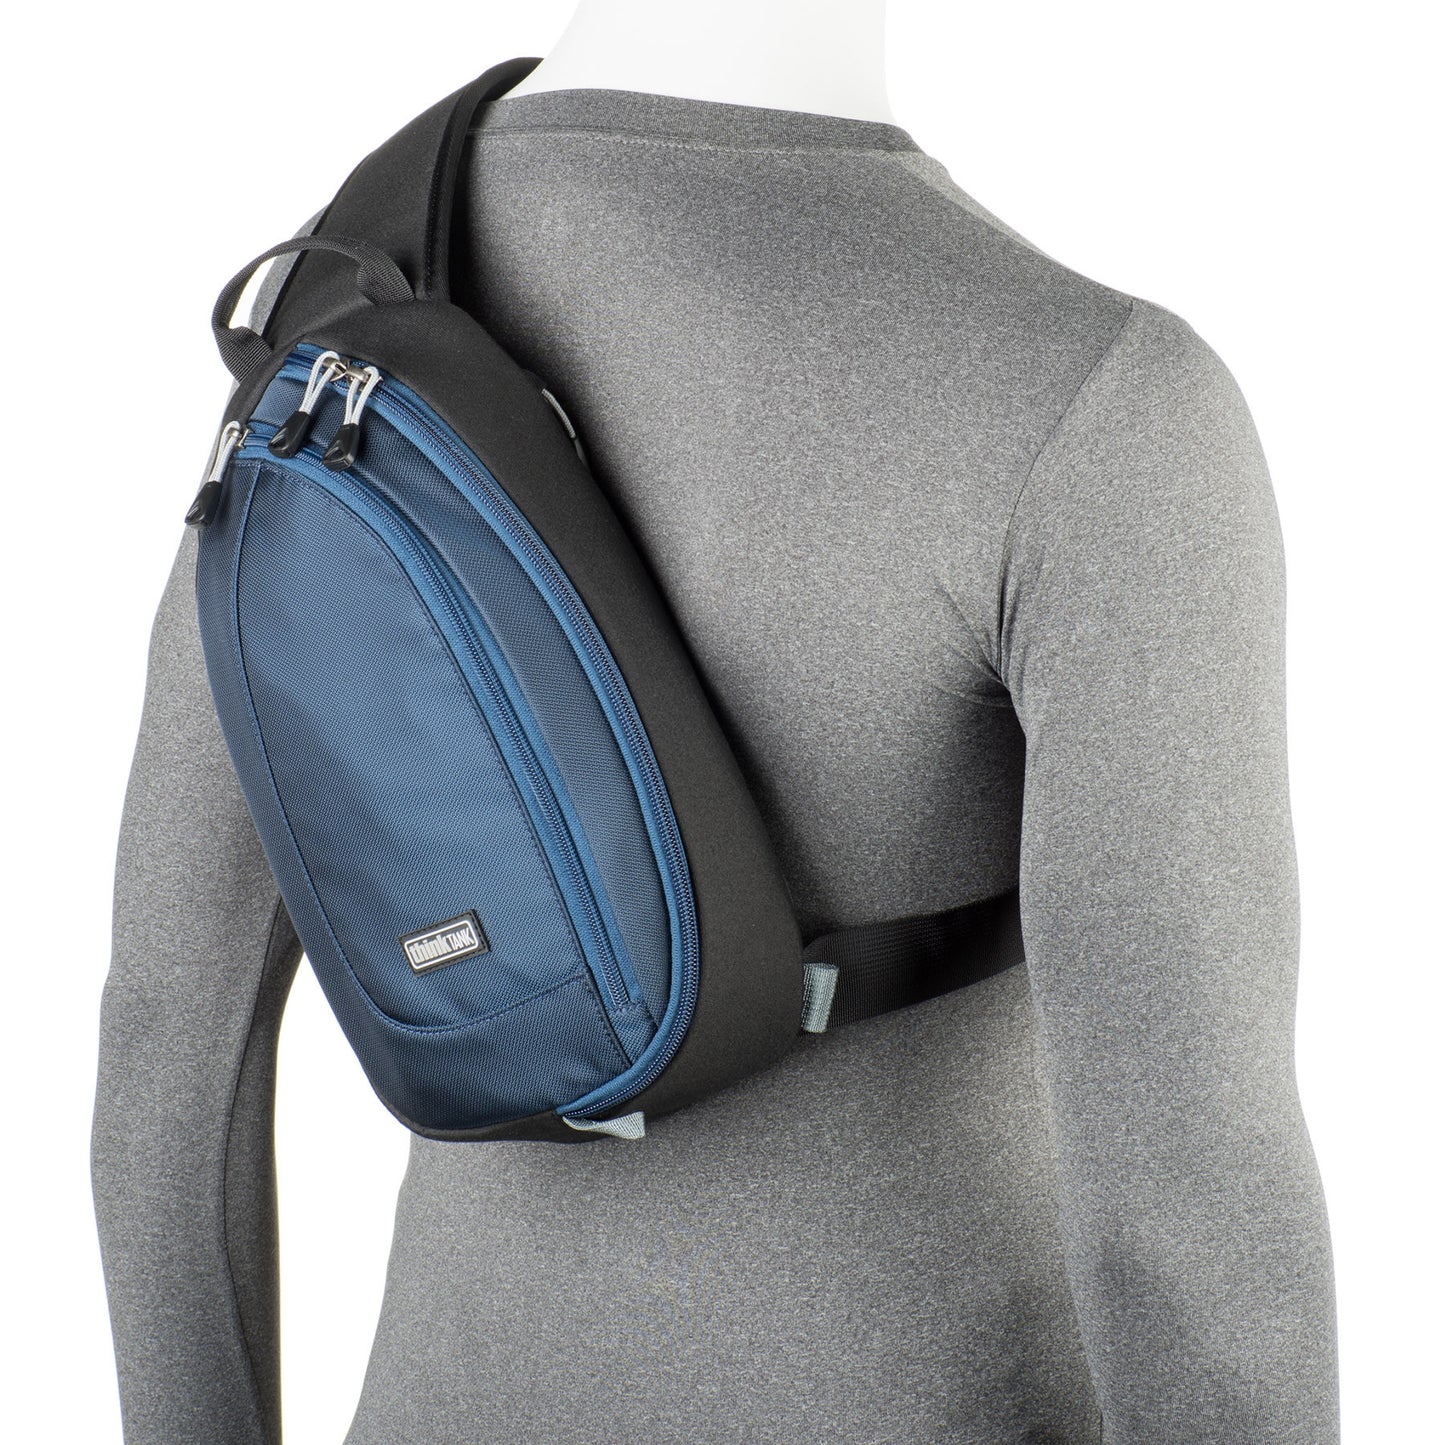 
                  
                    Slim, contoured, body-conforming design with a wide shoulder strap provides a very comfortable fit
                  
                